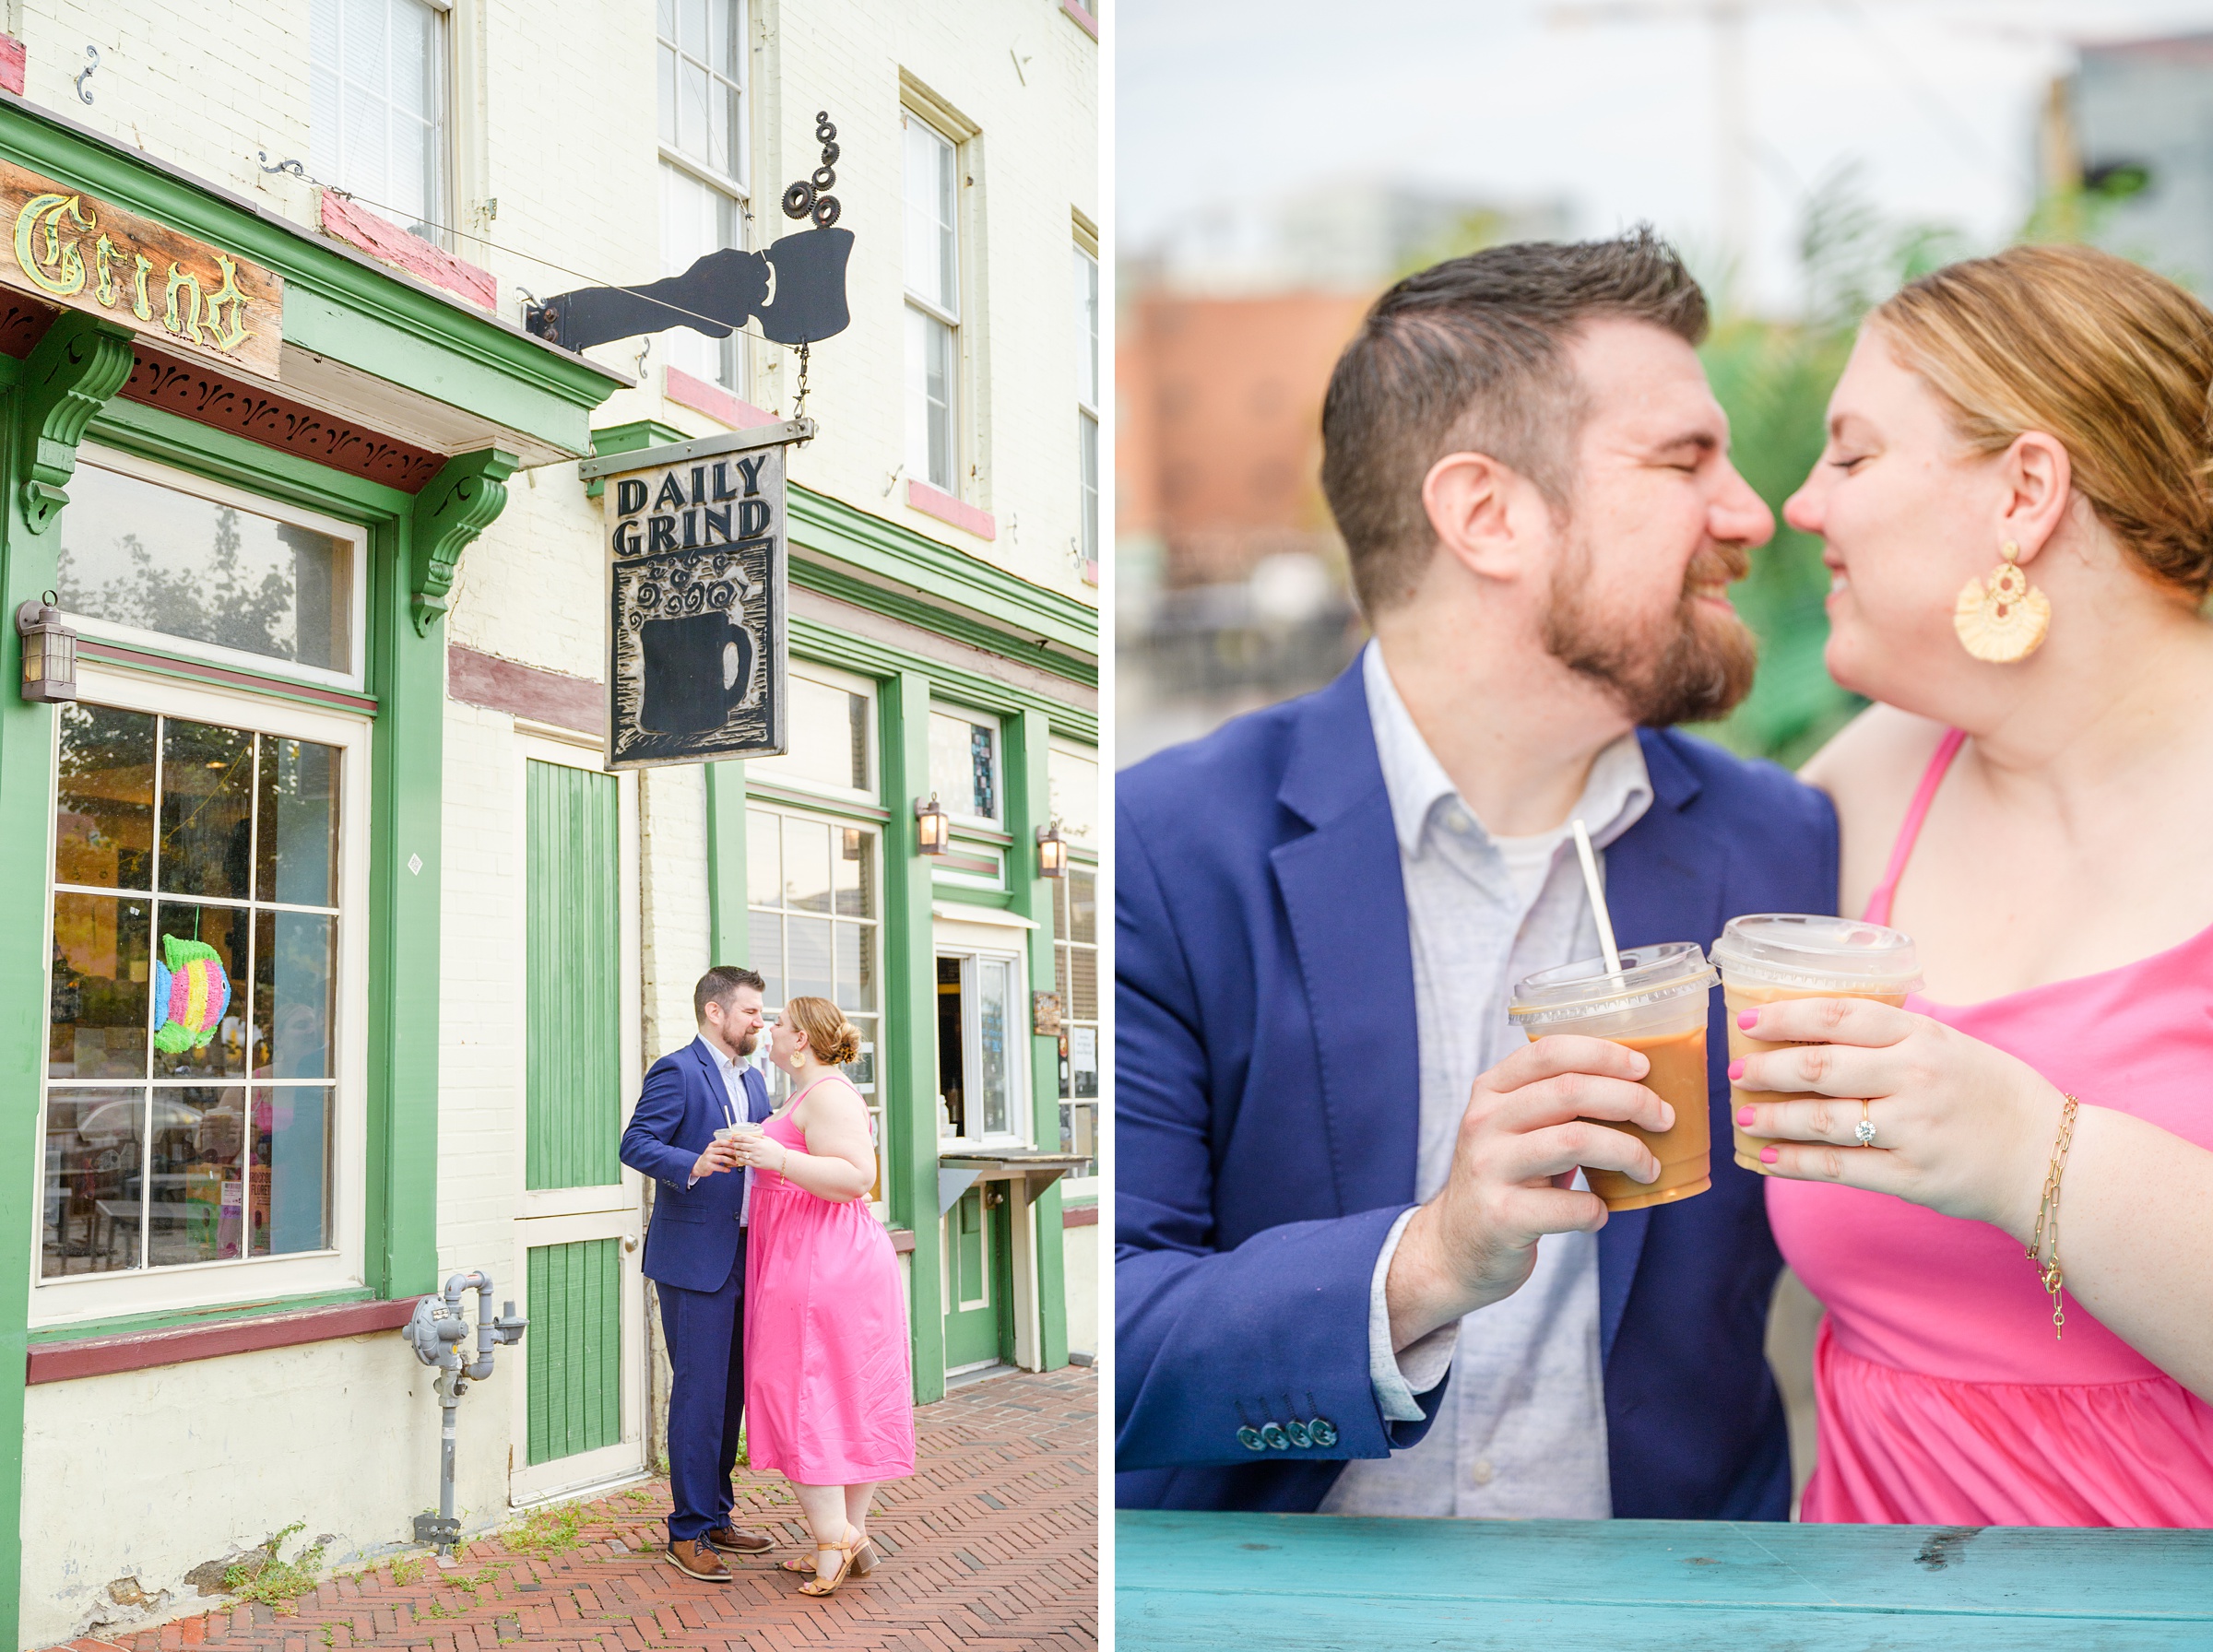 Engaged couple at Fells Point Waterfront for their sunrise engagement session in Baltimore, Maryland photographed by Baltimore Wedding Photographer Cait Kramer Photography.